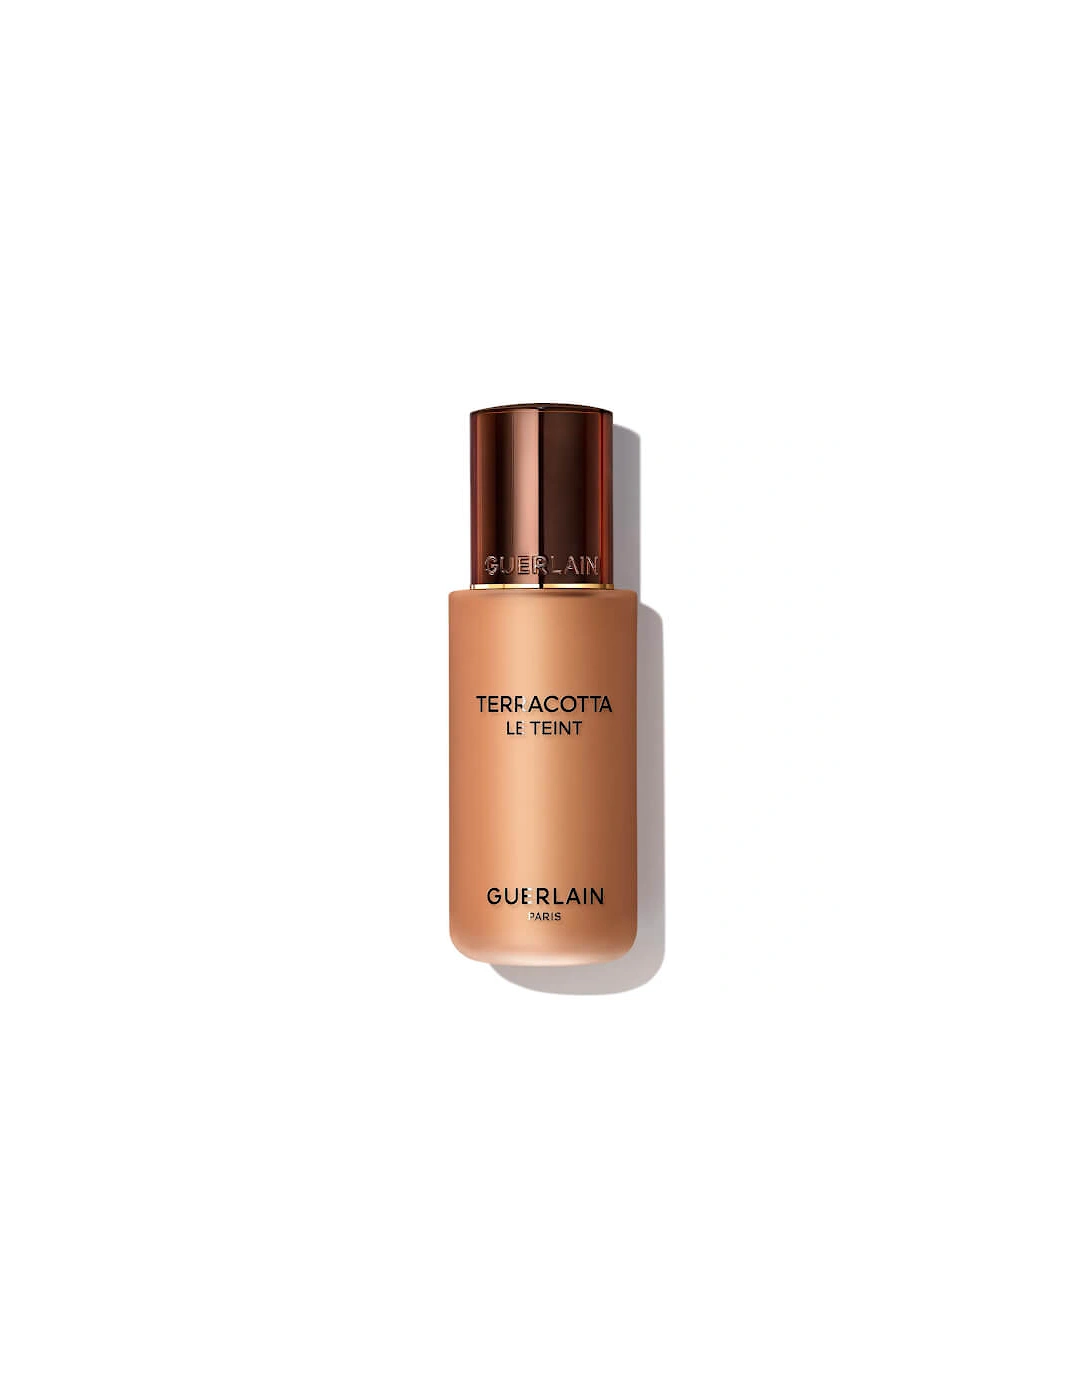 Terracotta Le Teint Healthy Glow Natural Perfection Foundation - 5W, 2 of 1